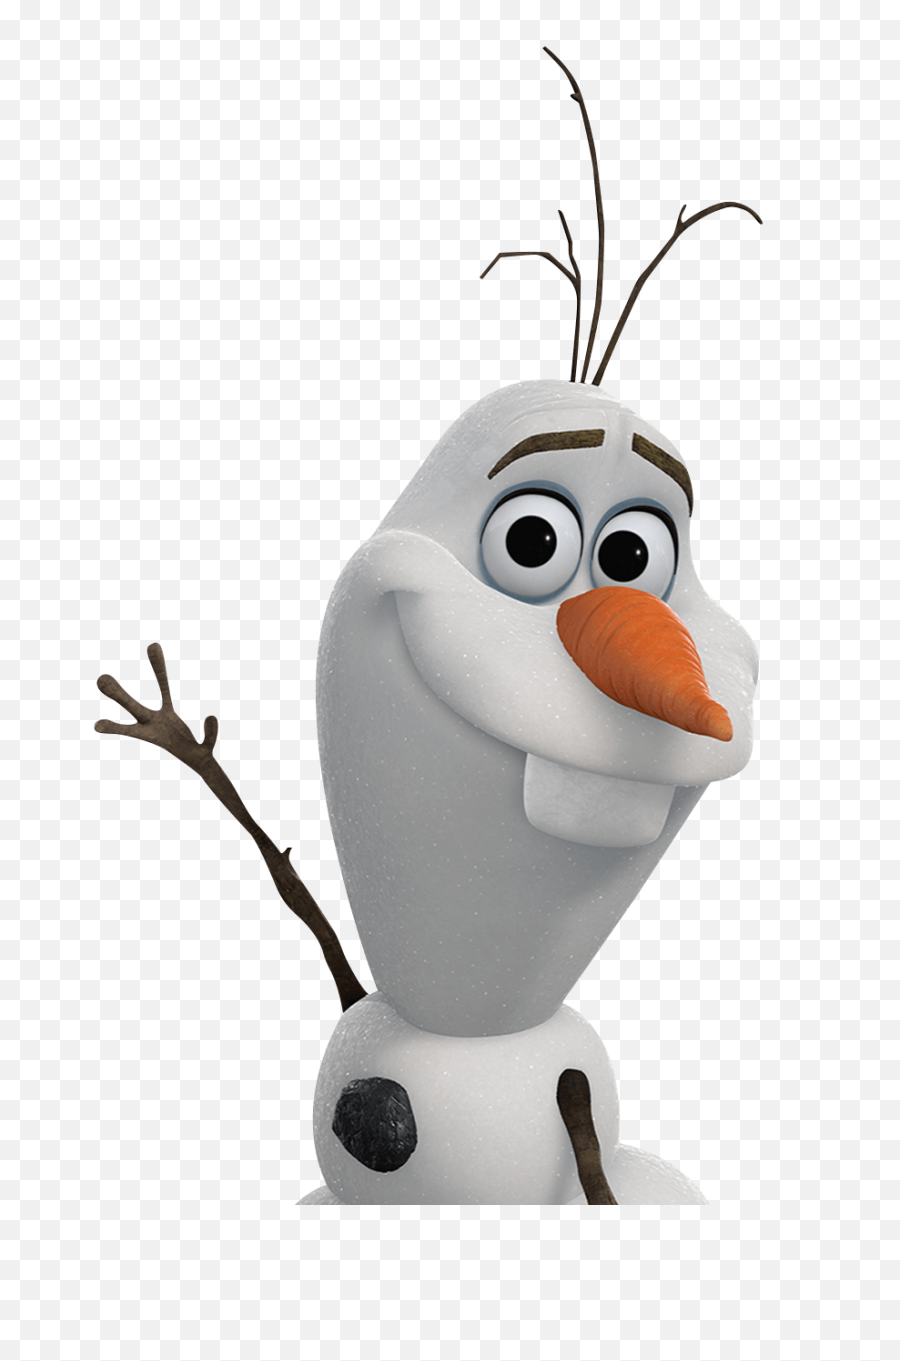 Download Frozen Snowman Olaf - Olaf Frozen Png,Olaf Png